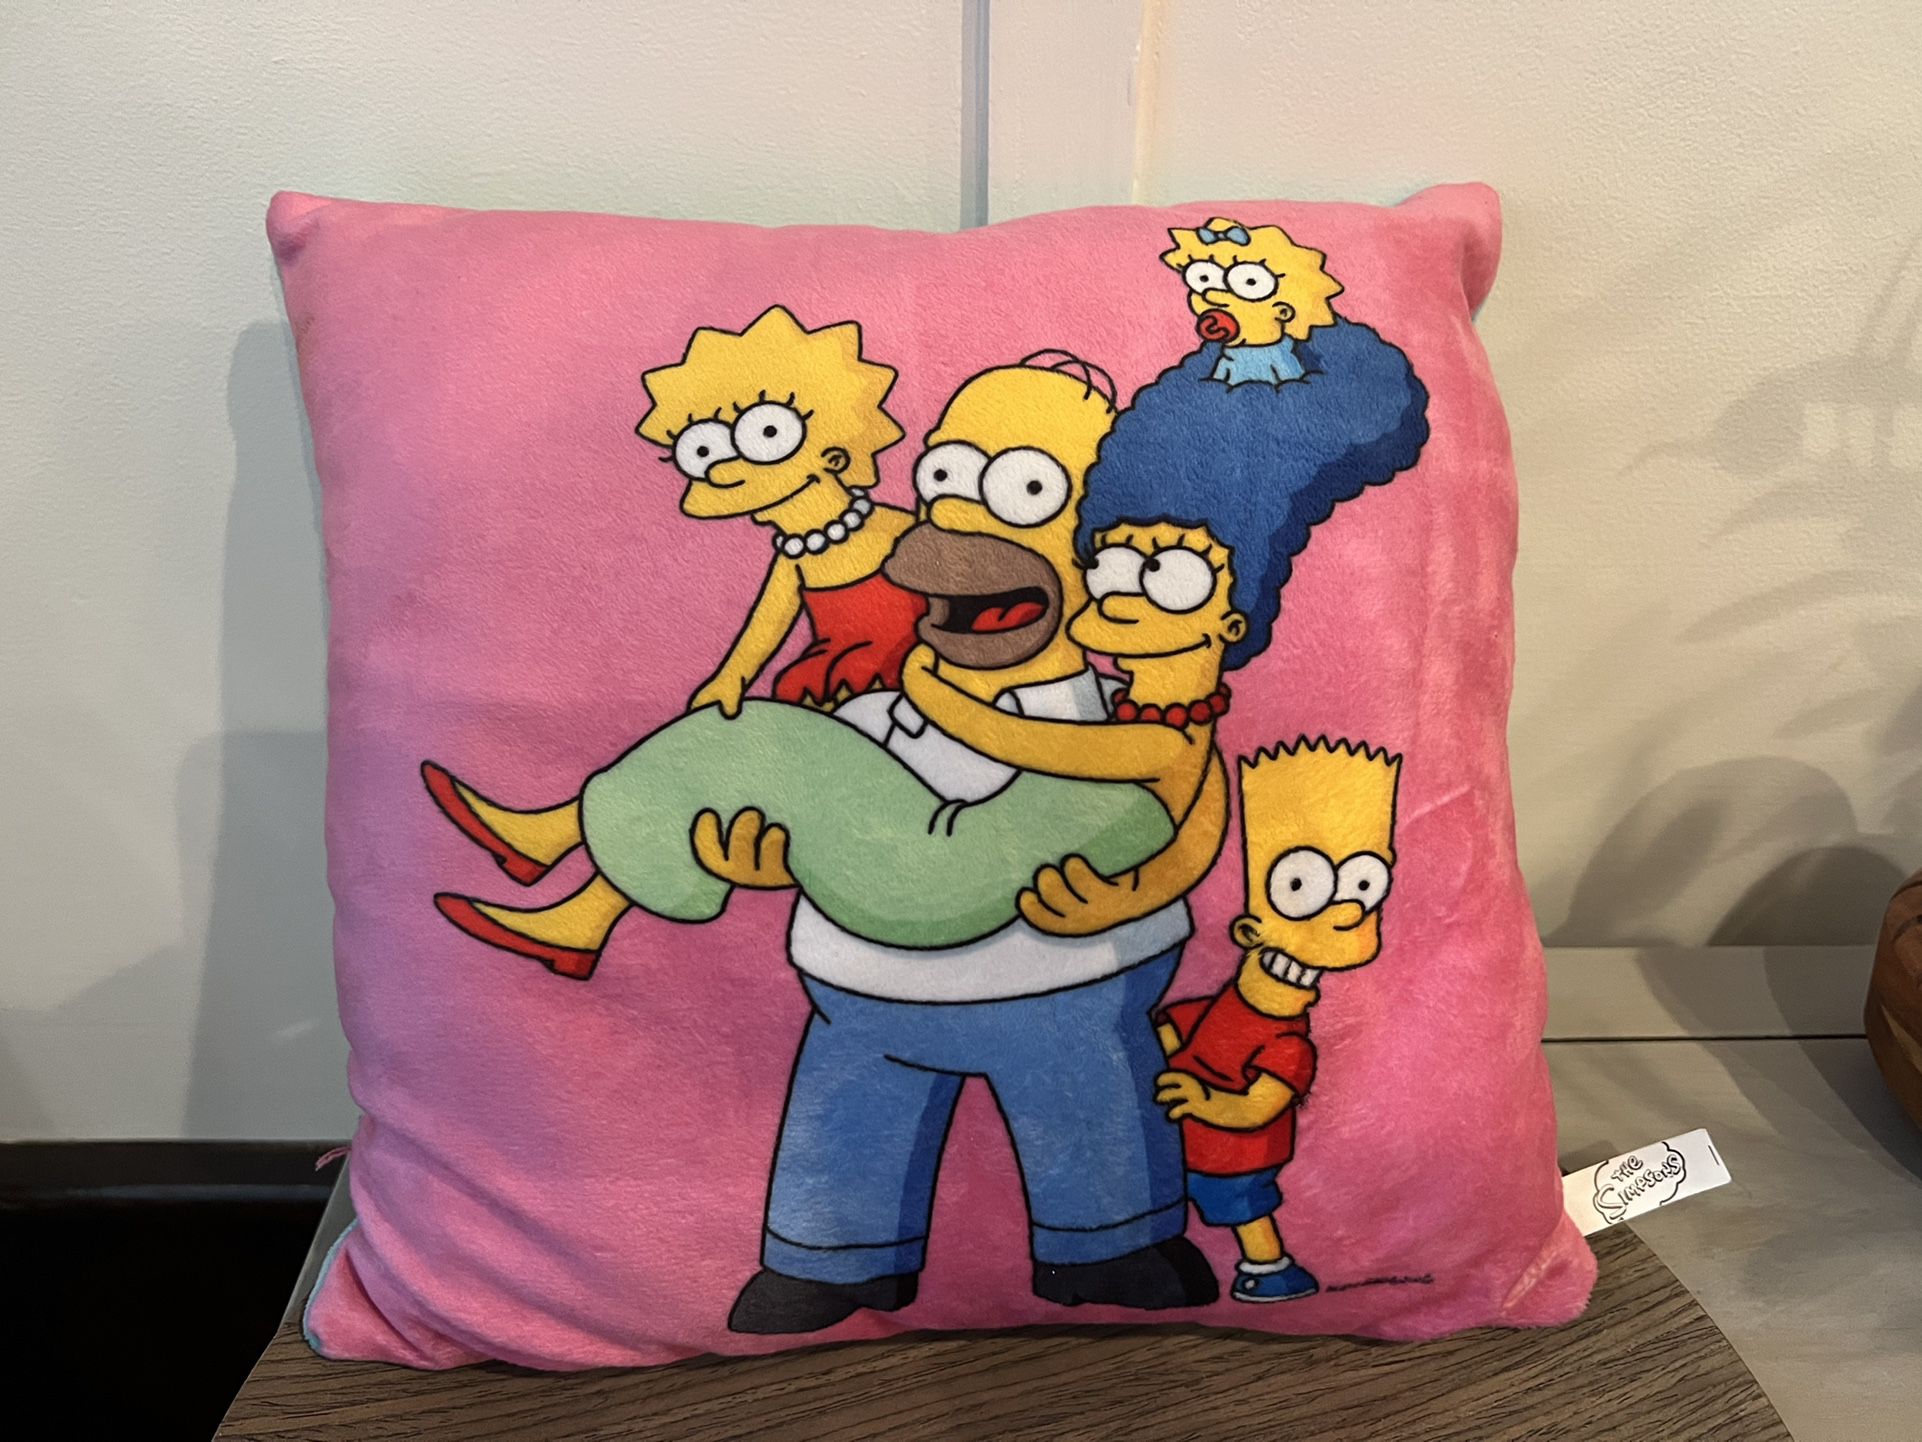 ✅ The Simpsons Pink Pillow, BRAND NEW, Collectors Item 